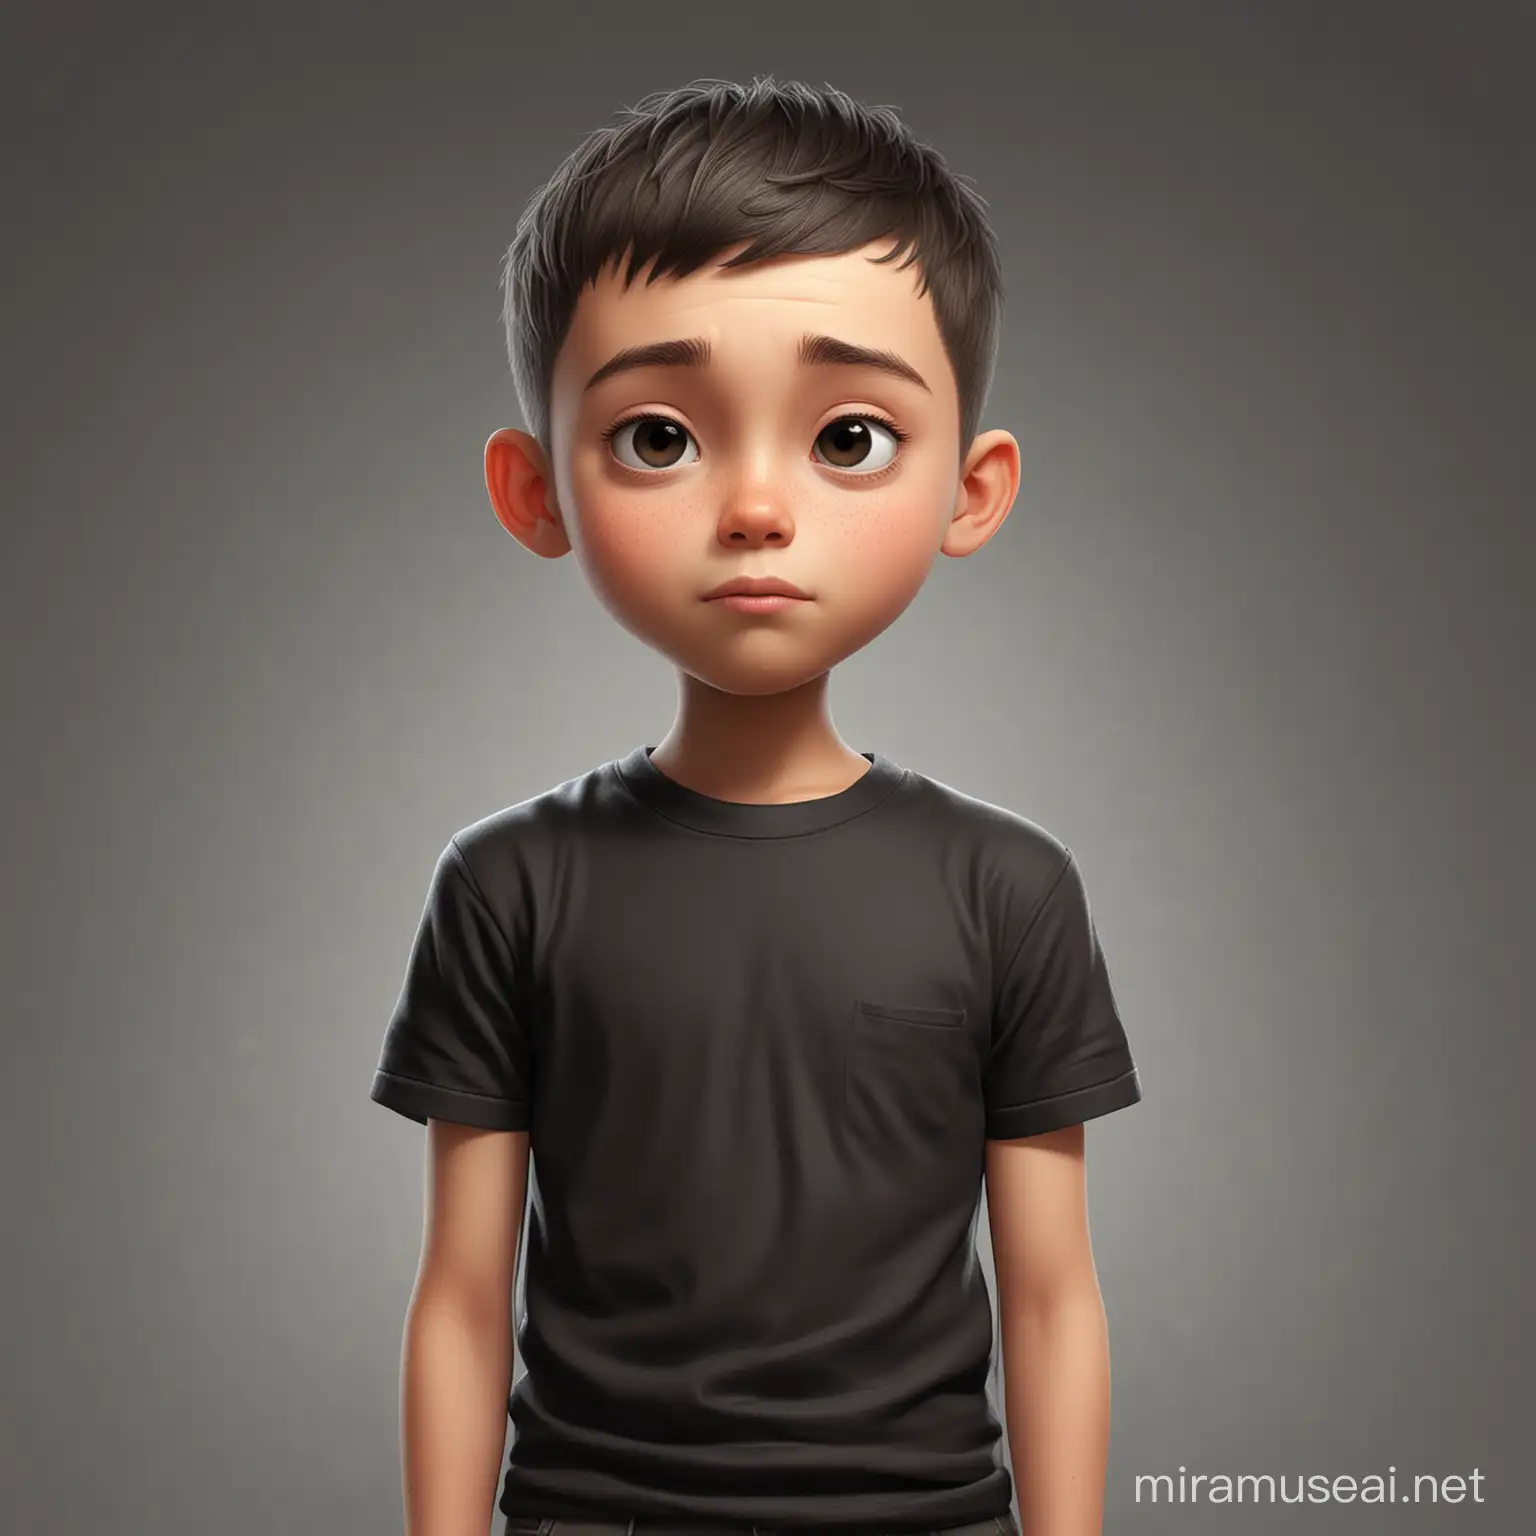 Young Boy Concentrating with Closed Eyes Cartoon Character with Black TShirt